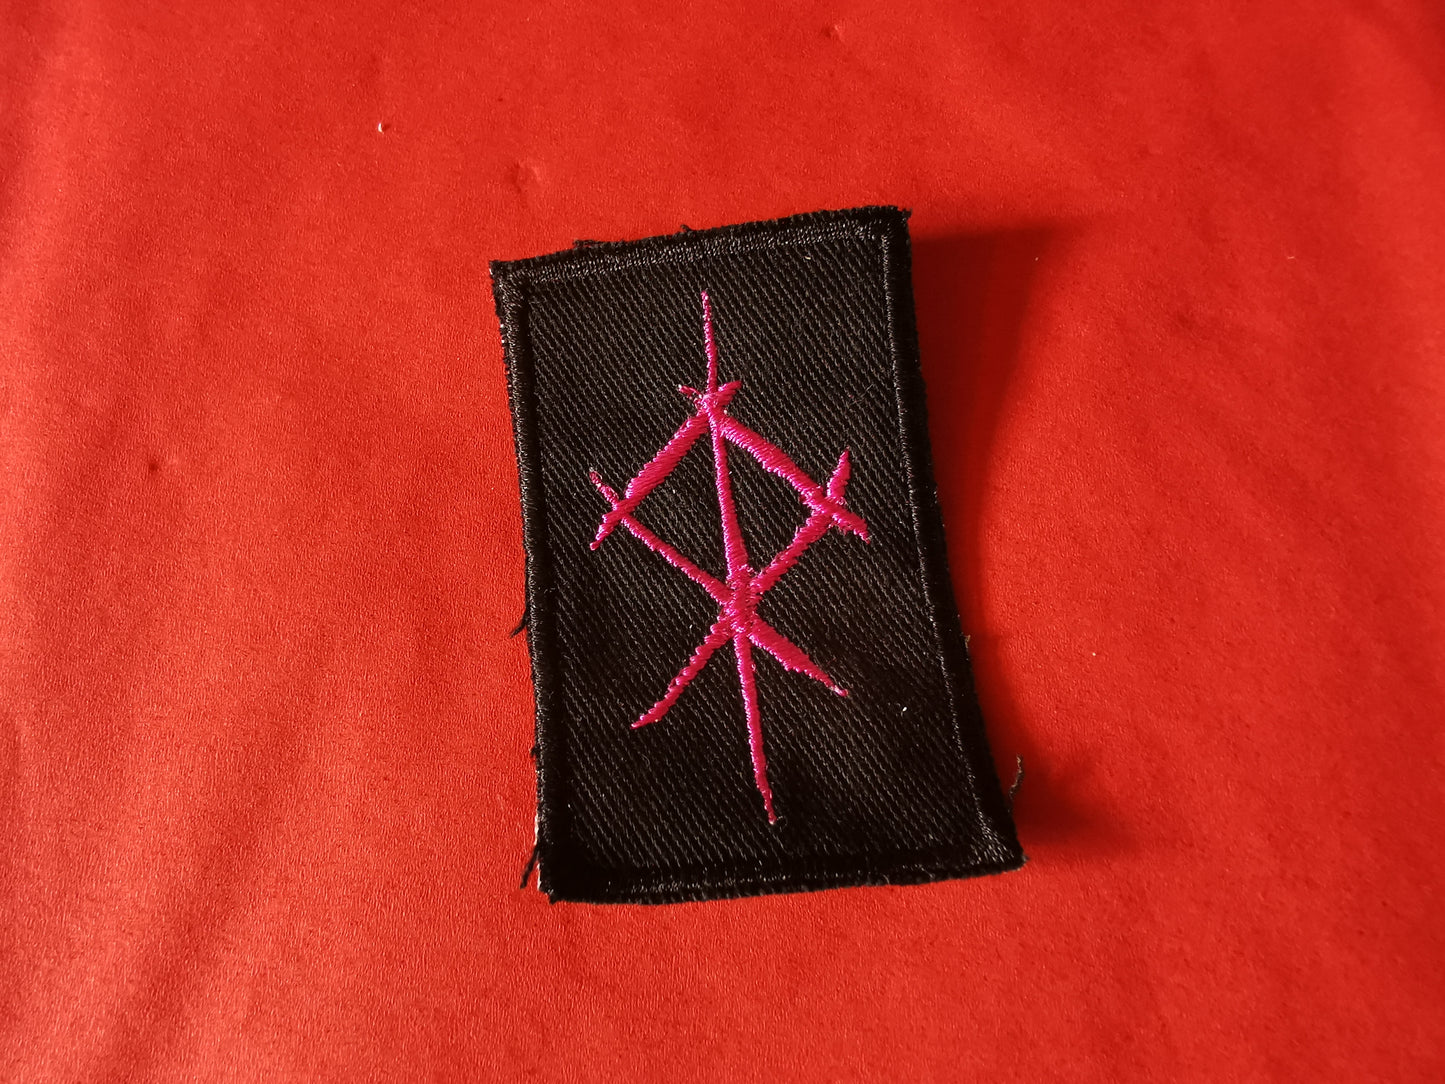 Odal Dark Fuschia Embroidered Patches Rough